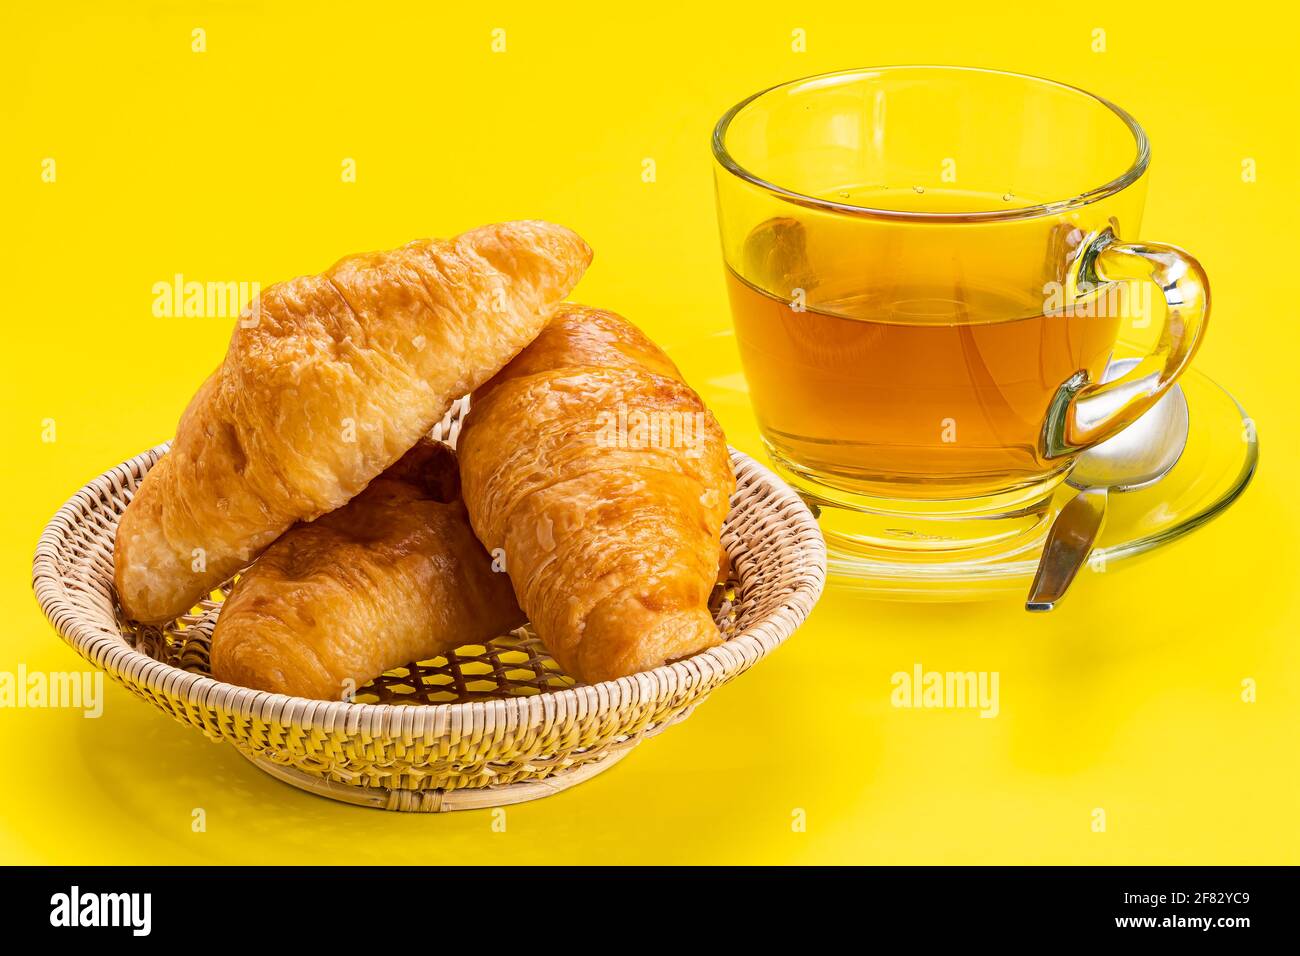 Simply breakfast with homemade croissants on bamboo basket and a cup of hot tea on yellow background. Stock Photo